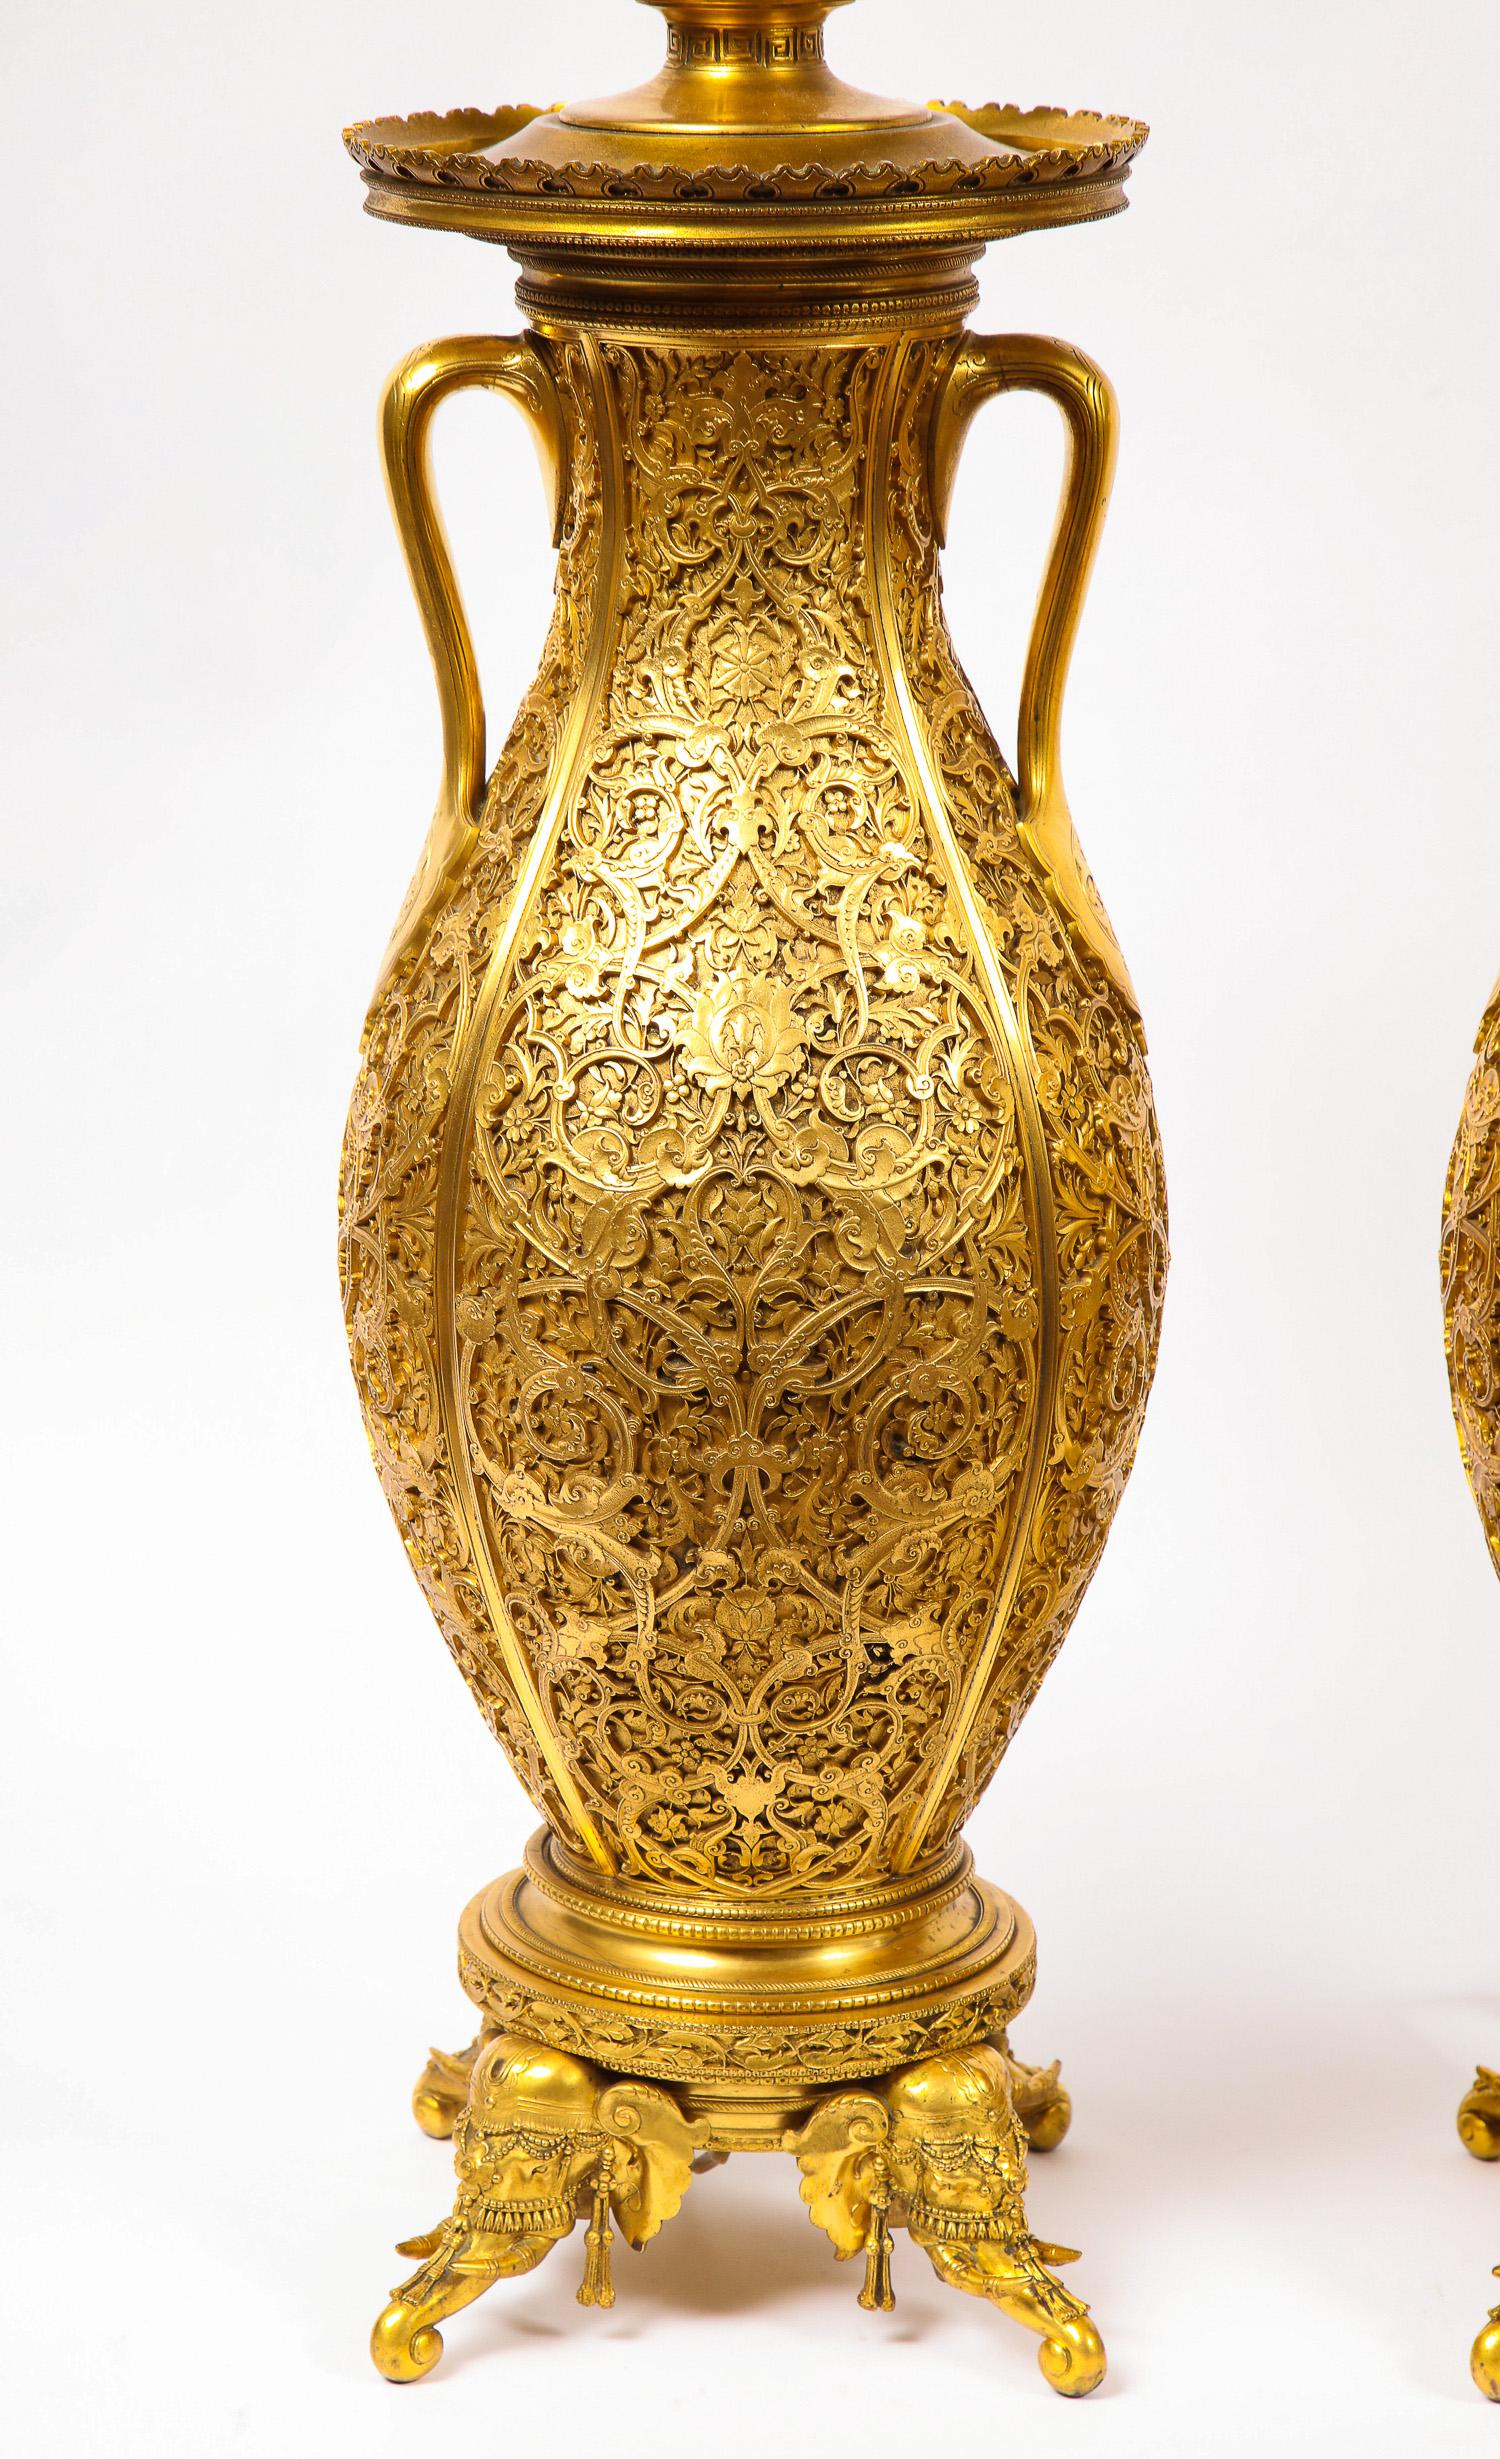 An important and monumental pair of very fine 19th century French Japonisme/Orientalist ormolu vases designed by Edouard Lièvre and Executed by Ferdinand Barbedienne. Each body with an oval shape, finely sculpted in a floral design, fringed by